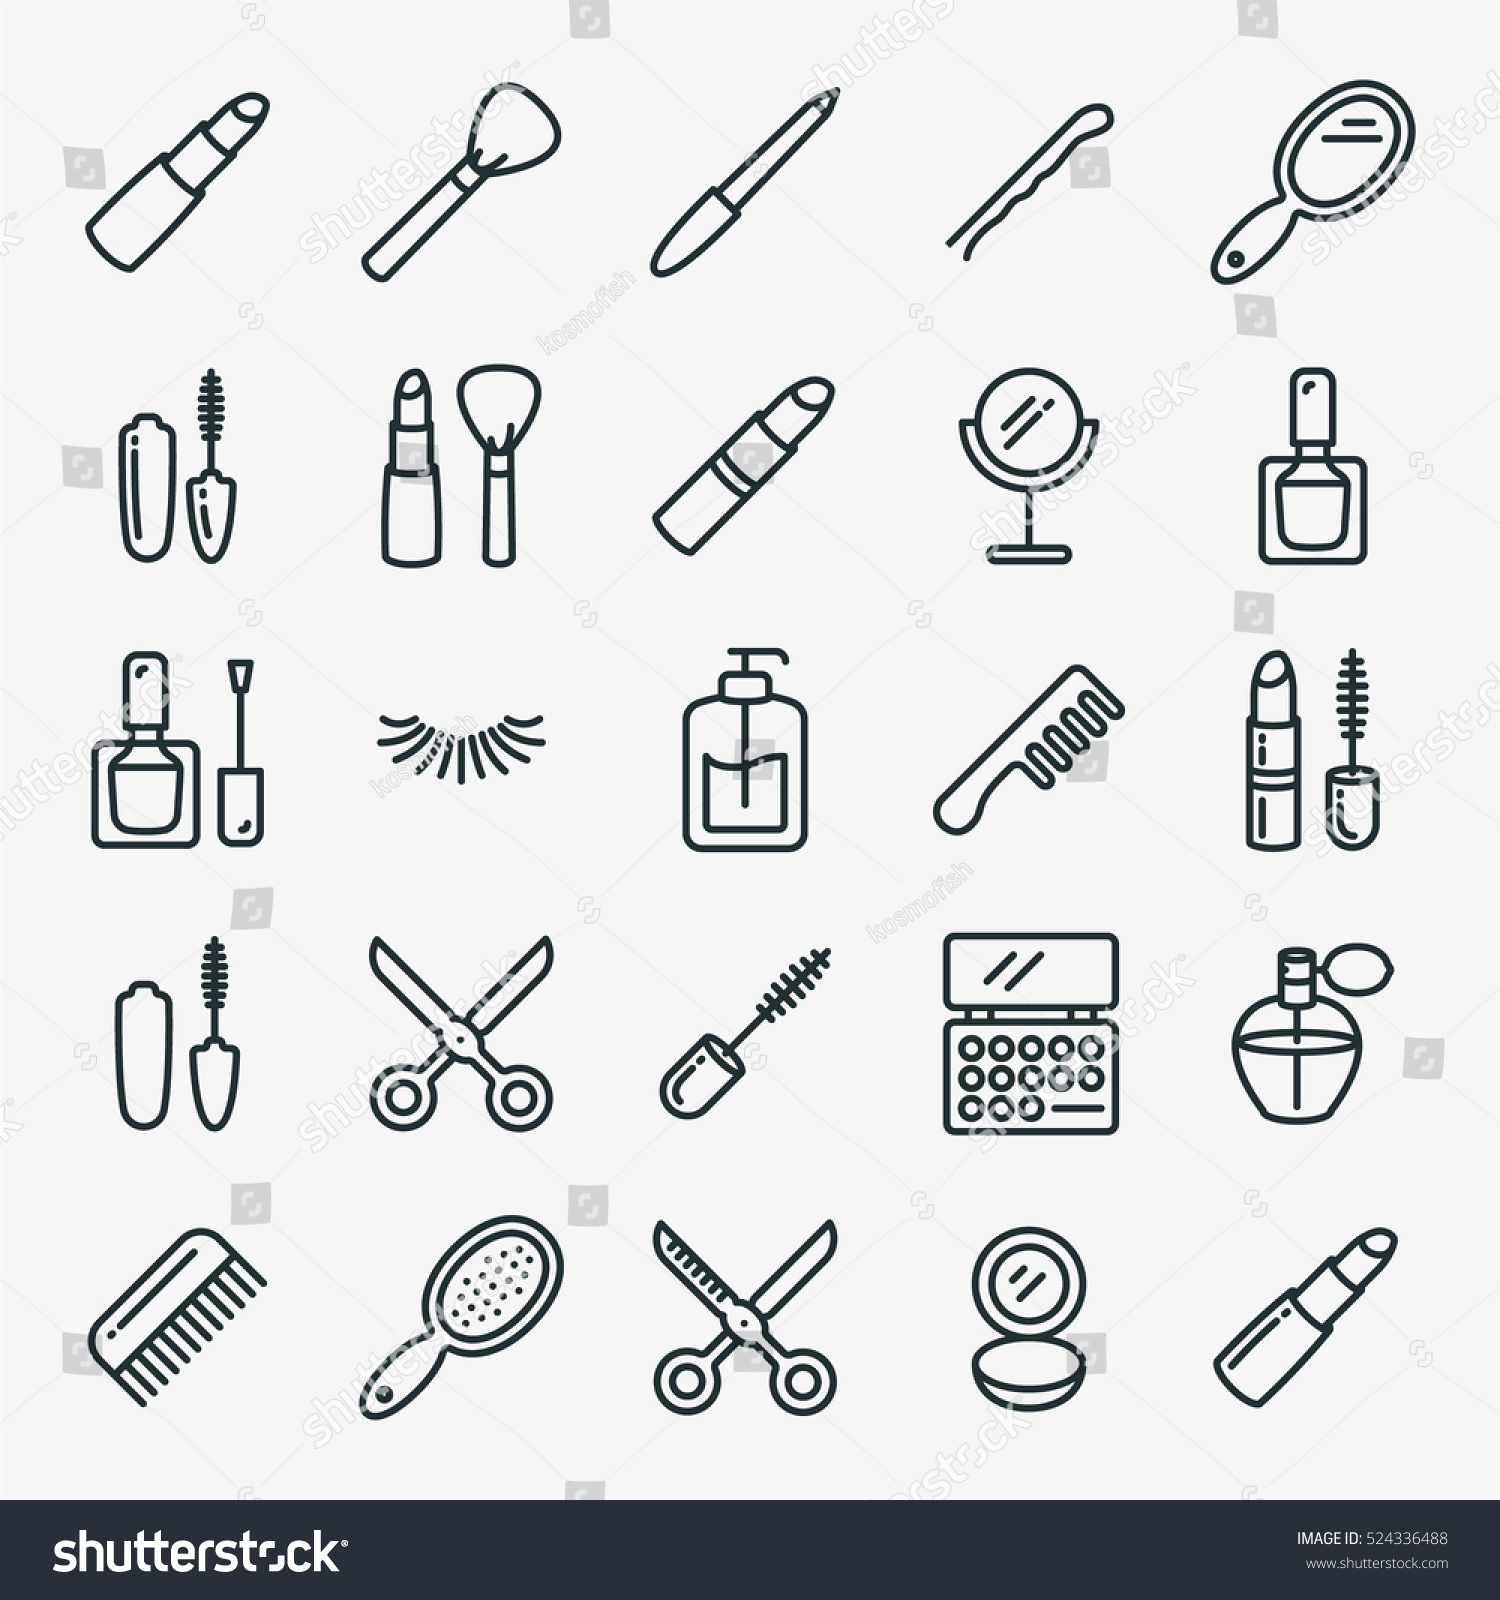 Beauty Cosmetic Minimalistic Flat Line Outline Stroke Icon Pictogram Symbol Set Collection #524336488